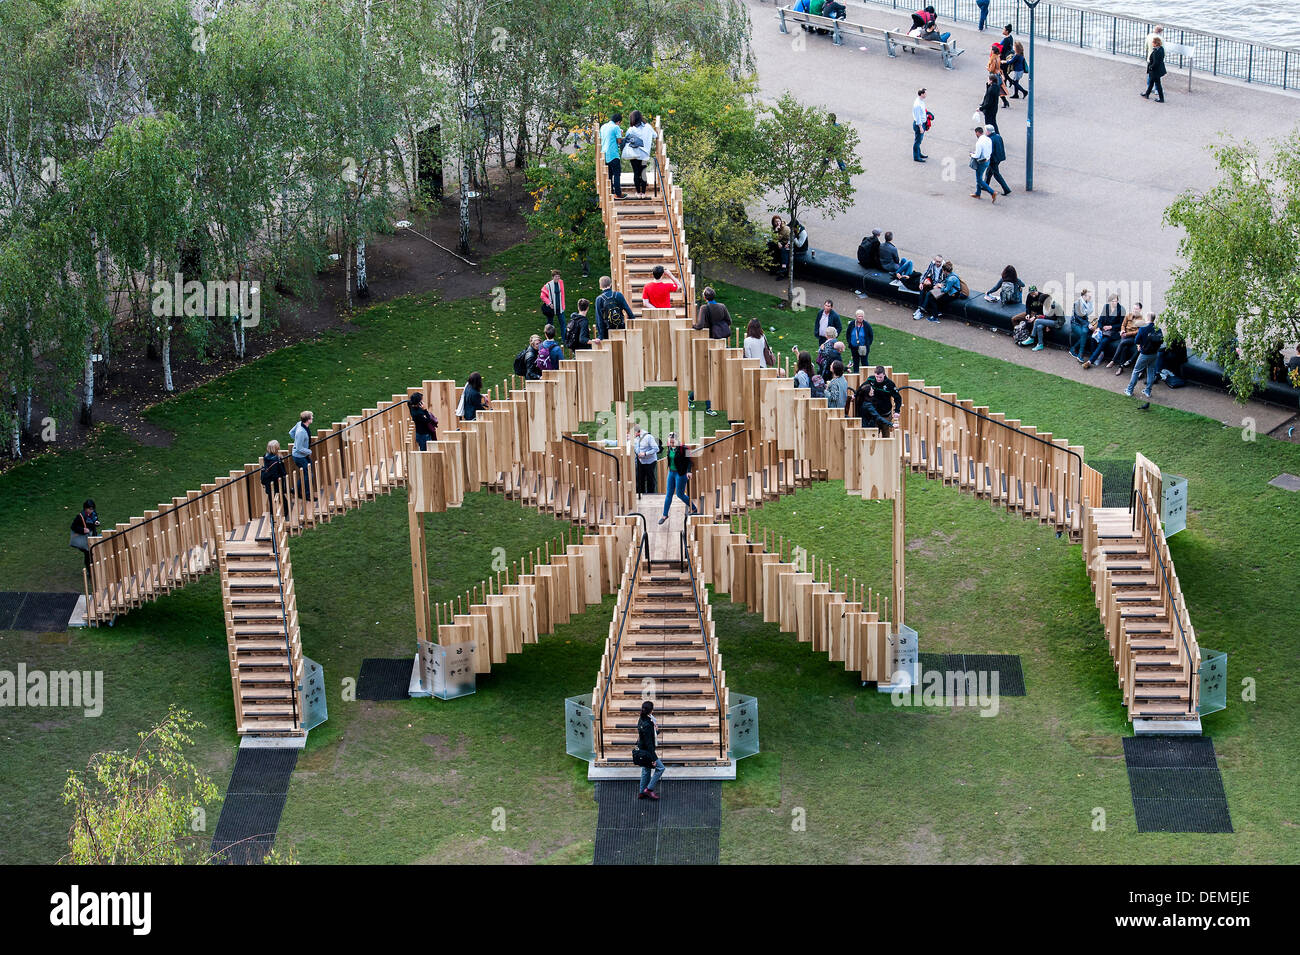 London, UK. 20th Sep, 2013. Endless Stair: commissioned for the London Design Festival, it invites visitors to climb and explore a series of 15 Escher-like interlocking staircases made from a prefabricated construction using 44 cubic metres of American tulipwood donated by AHEC members.  It was designed by Alex de Rijke, Co-Founder of dRMM Architects and Dean of Architecture at the Royal College of Art, working closely with engineers at Arup. Tulipwood is a plentiful and sustainable American hardwood export, and is being used for the first time as cross-laminated timber. © Guy Bell/Alamy Live Stock Photo